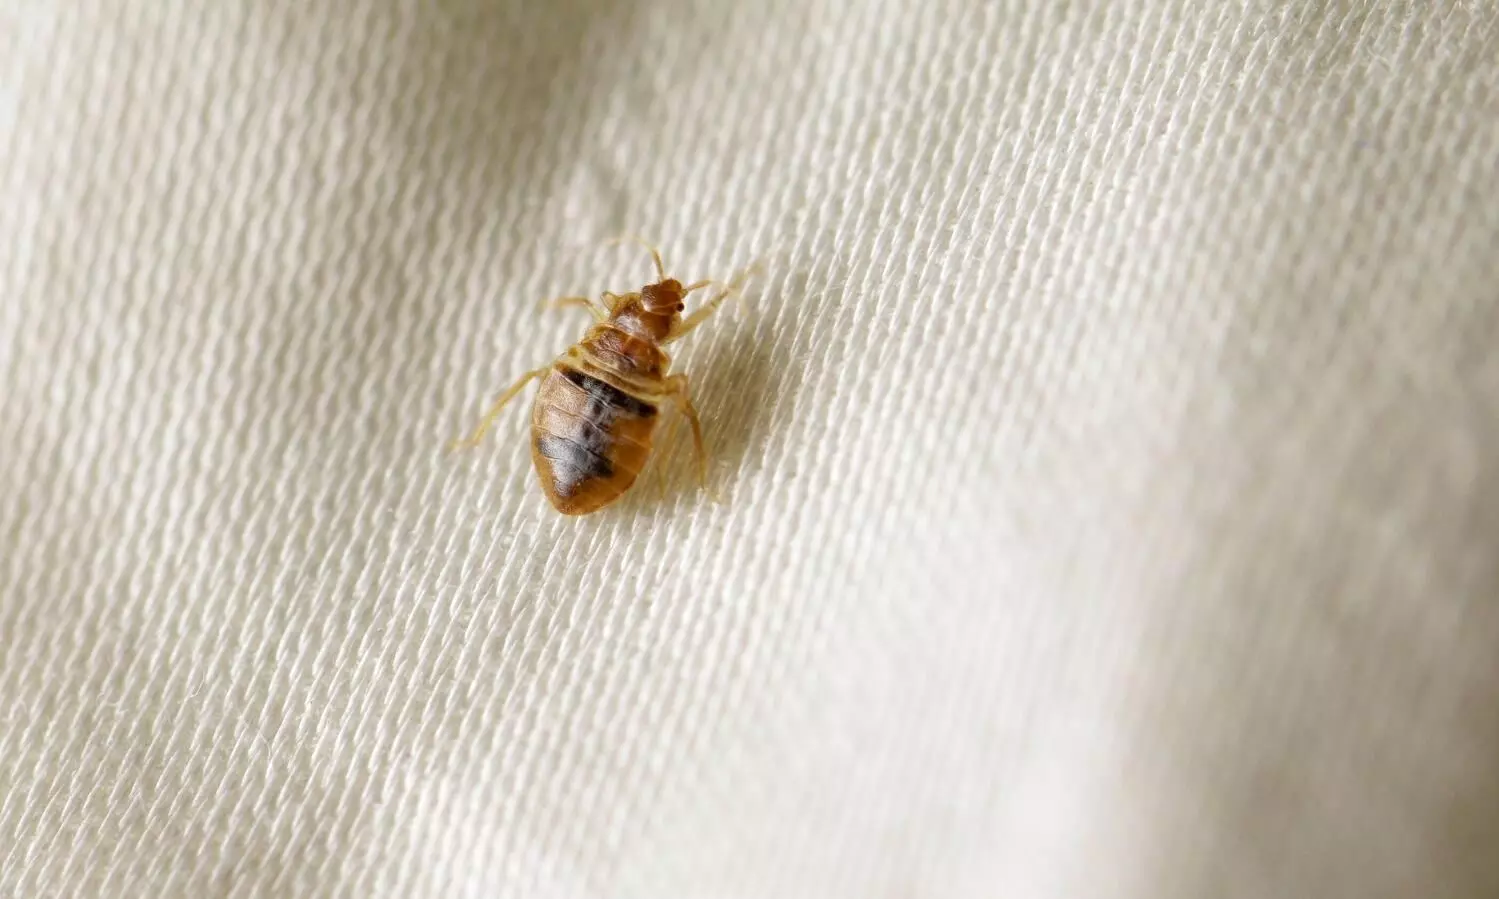 Massive bedbug outbreak reported across Paris stoking fears